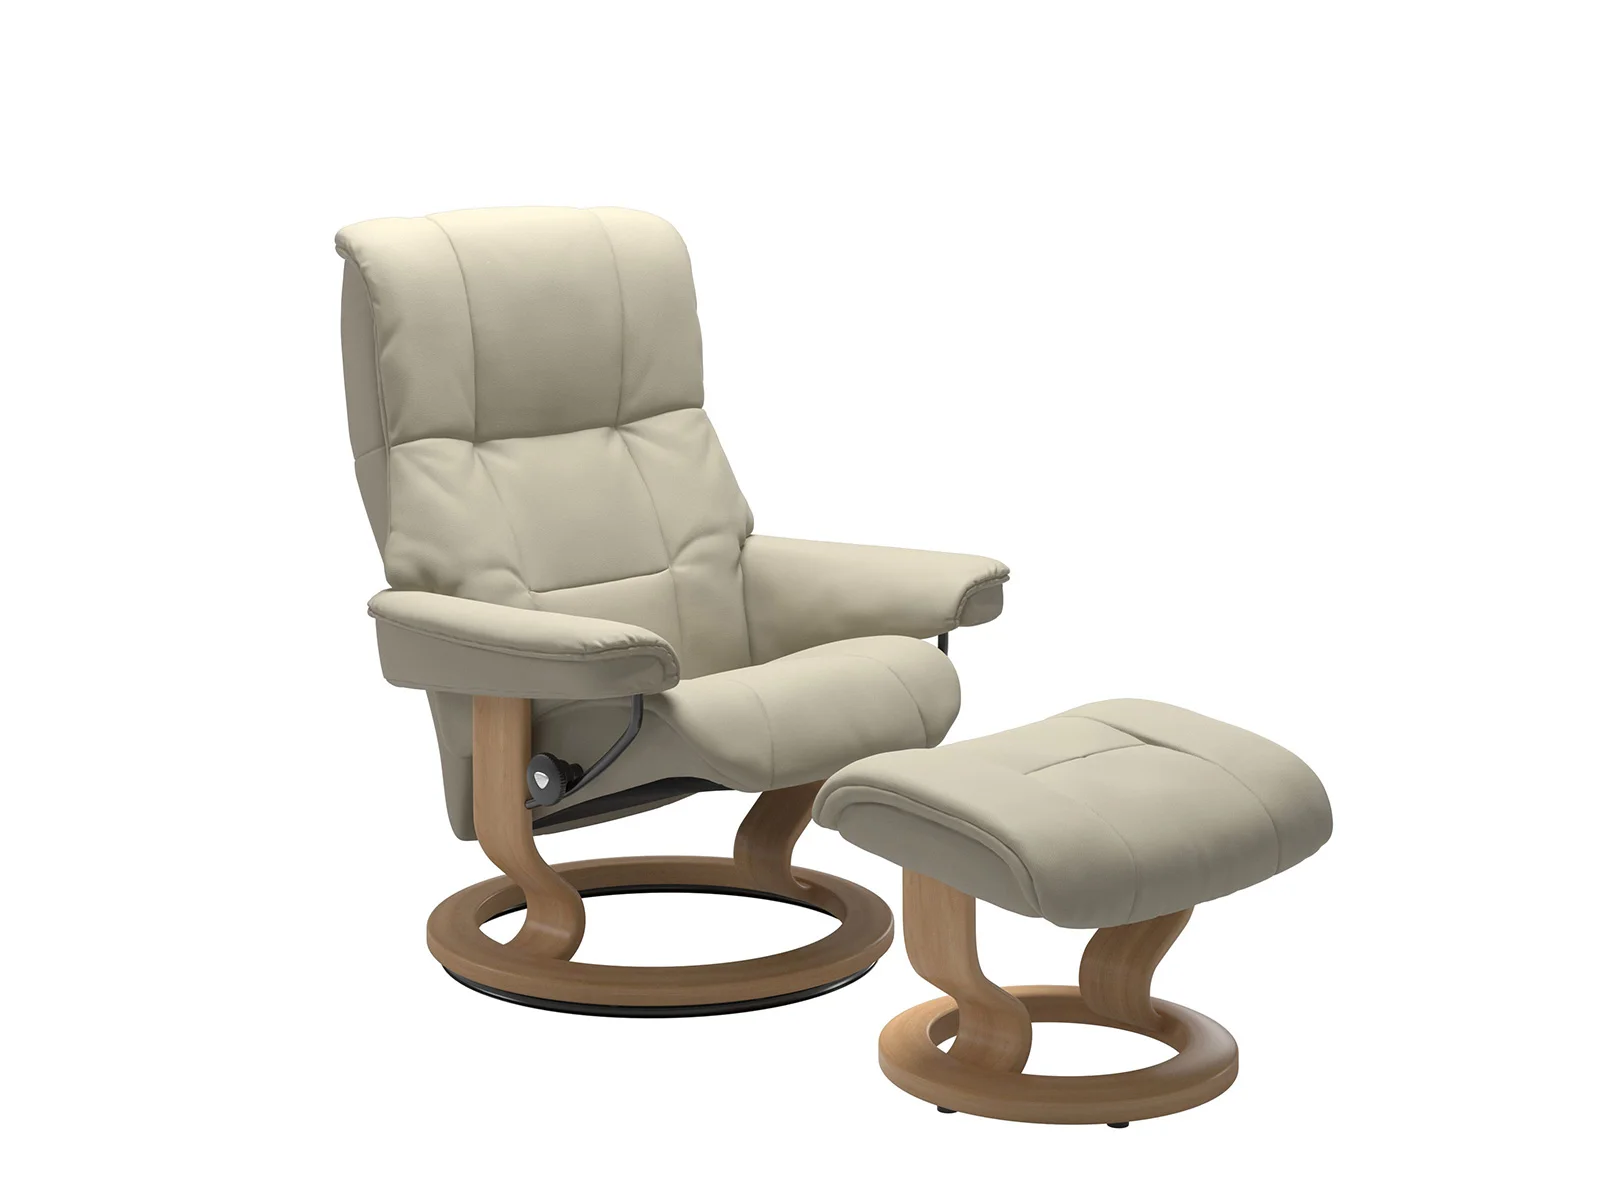 Swivel Recliner Chair And Stool